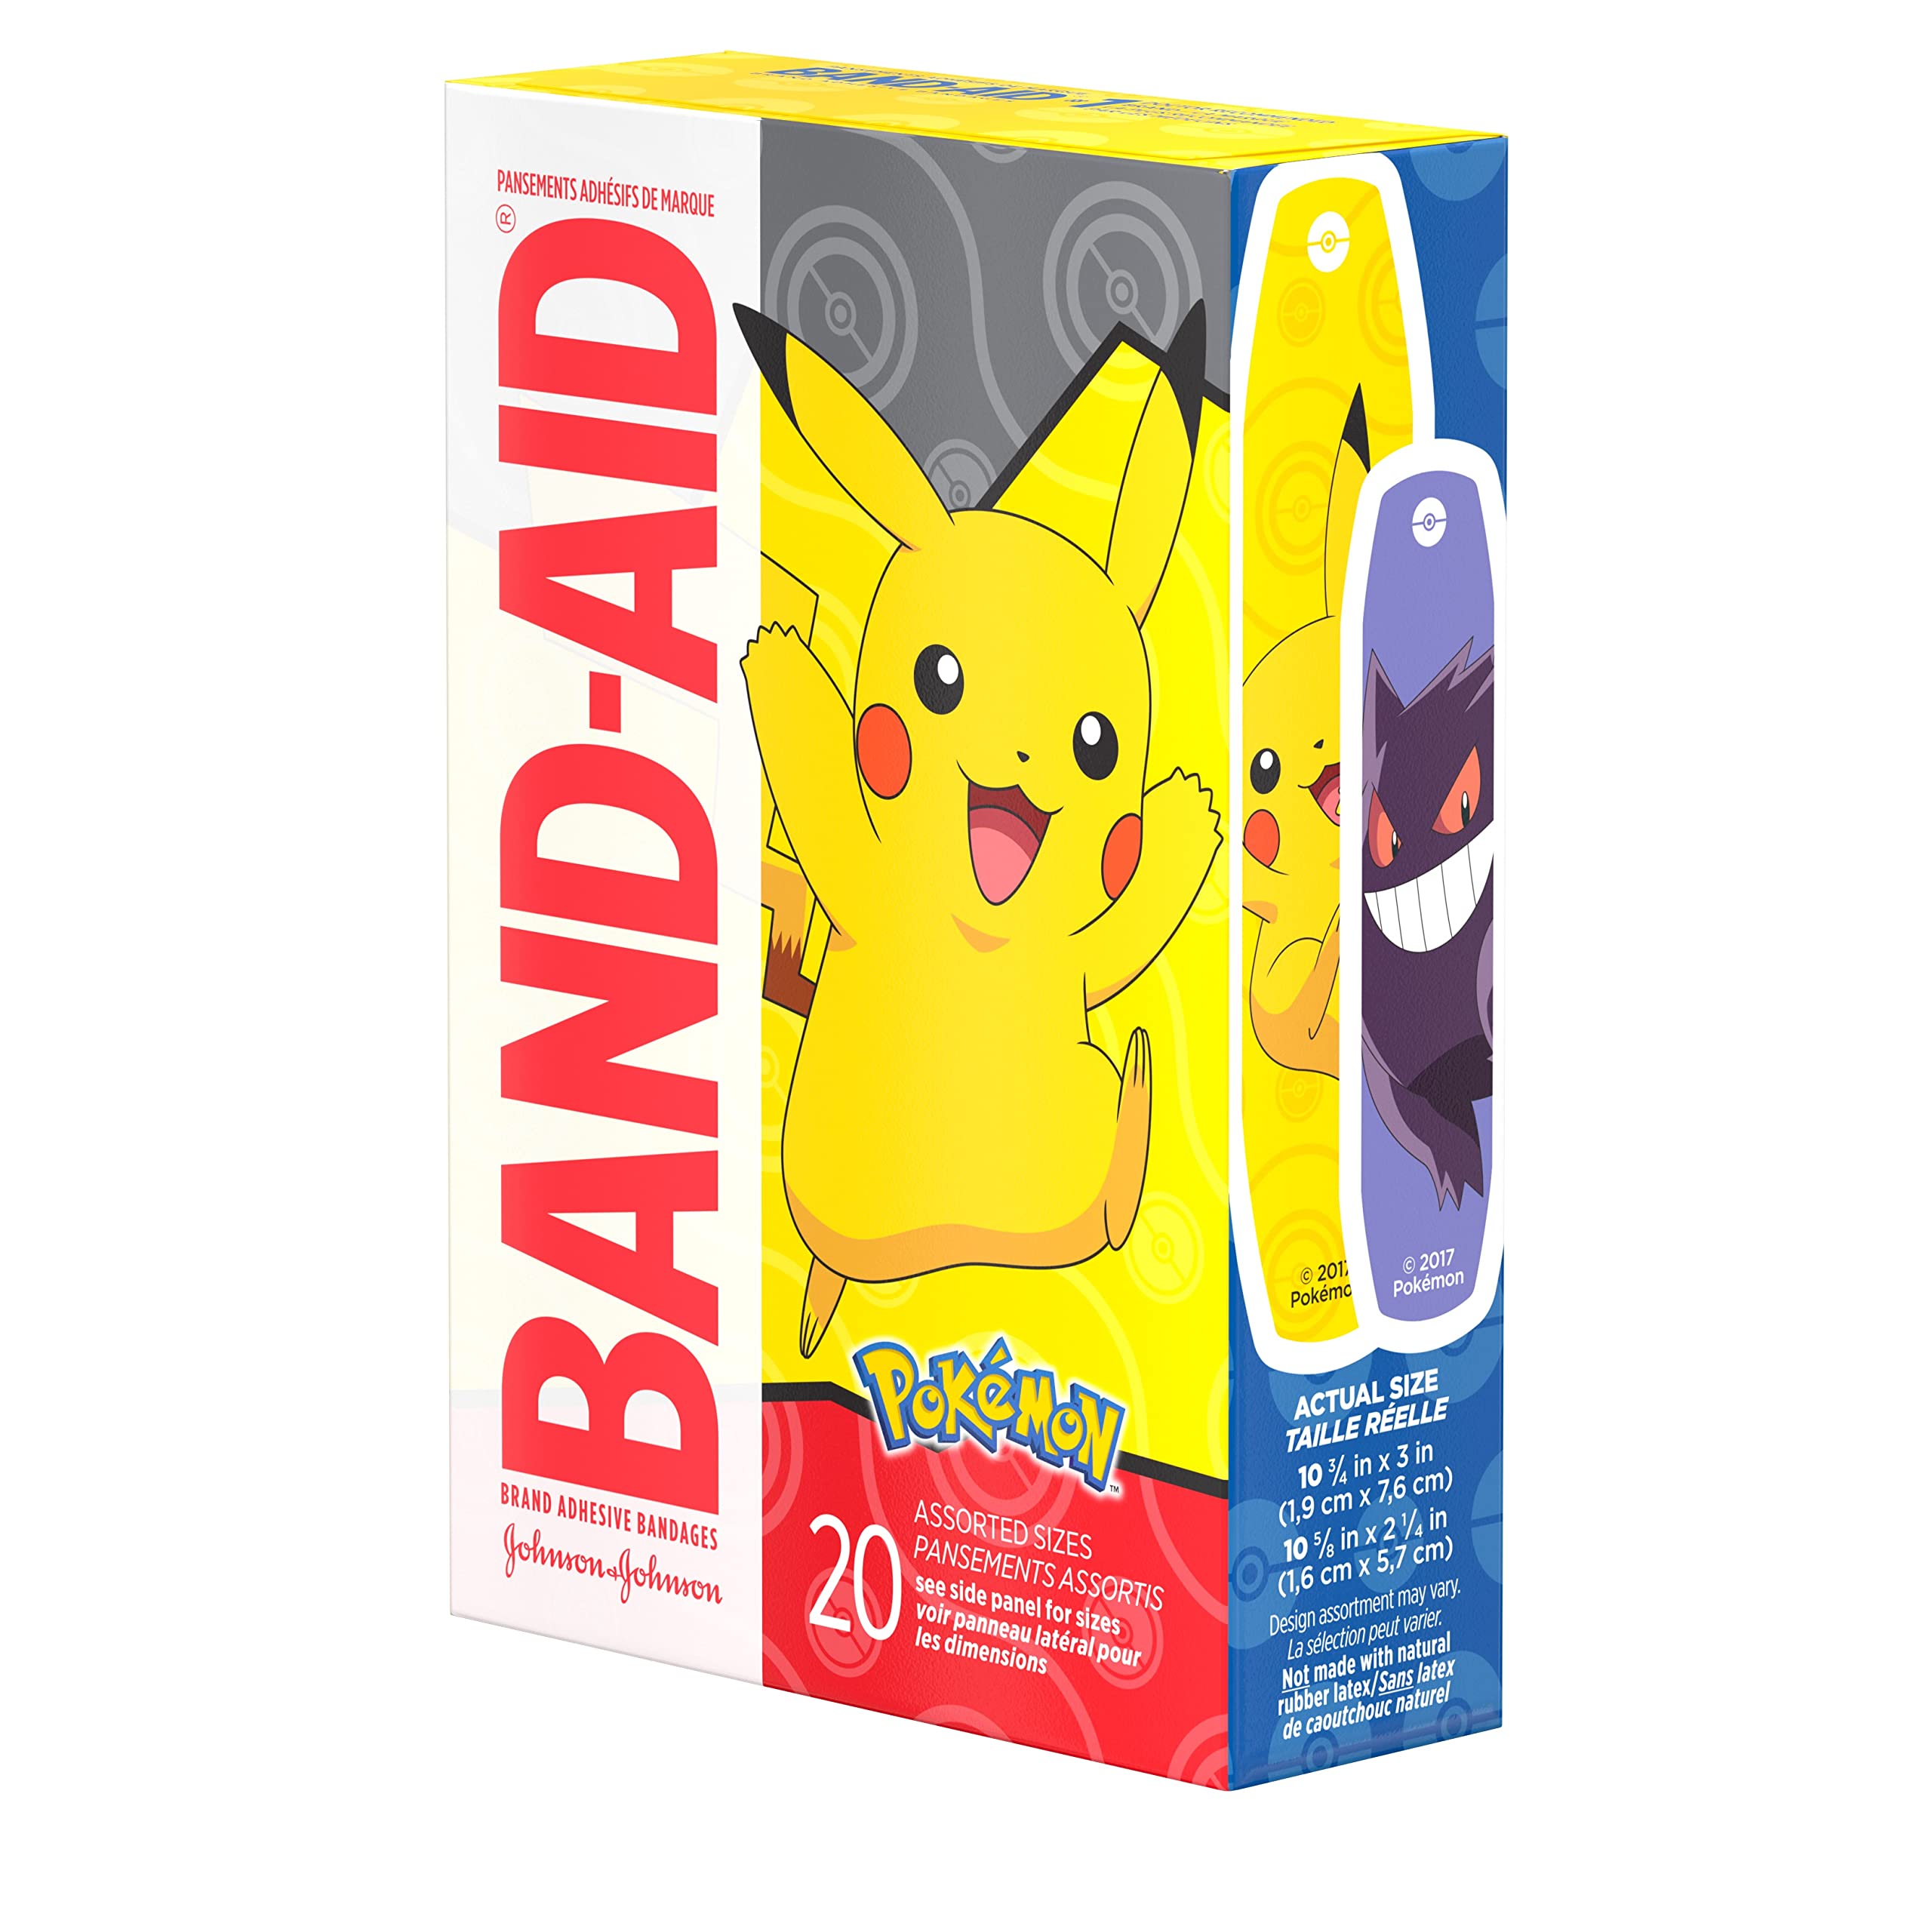 Band-Aid Brand Adhesive Bandages for Minor Cuts & Scrapes, Wound Care Featuring Pokémon Characters for Kids, Assorted Sizes 20 ct